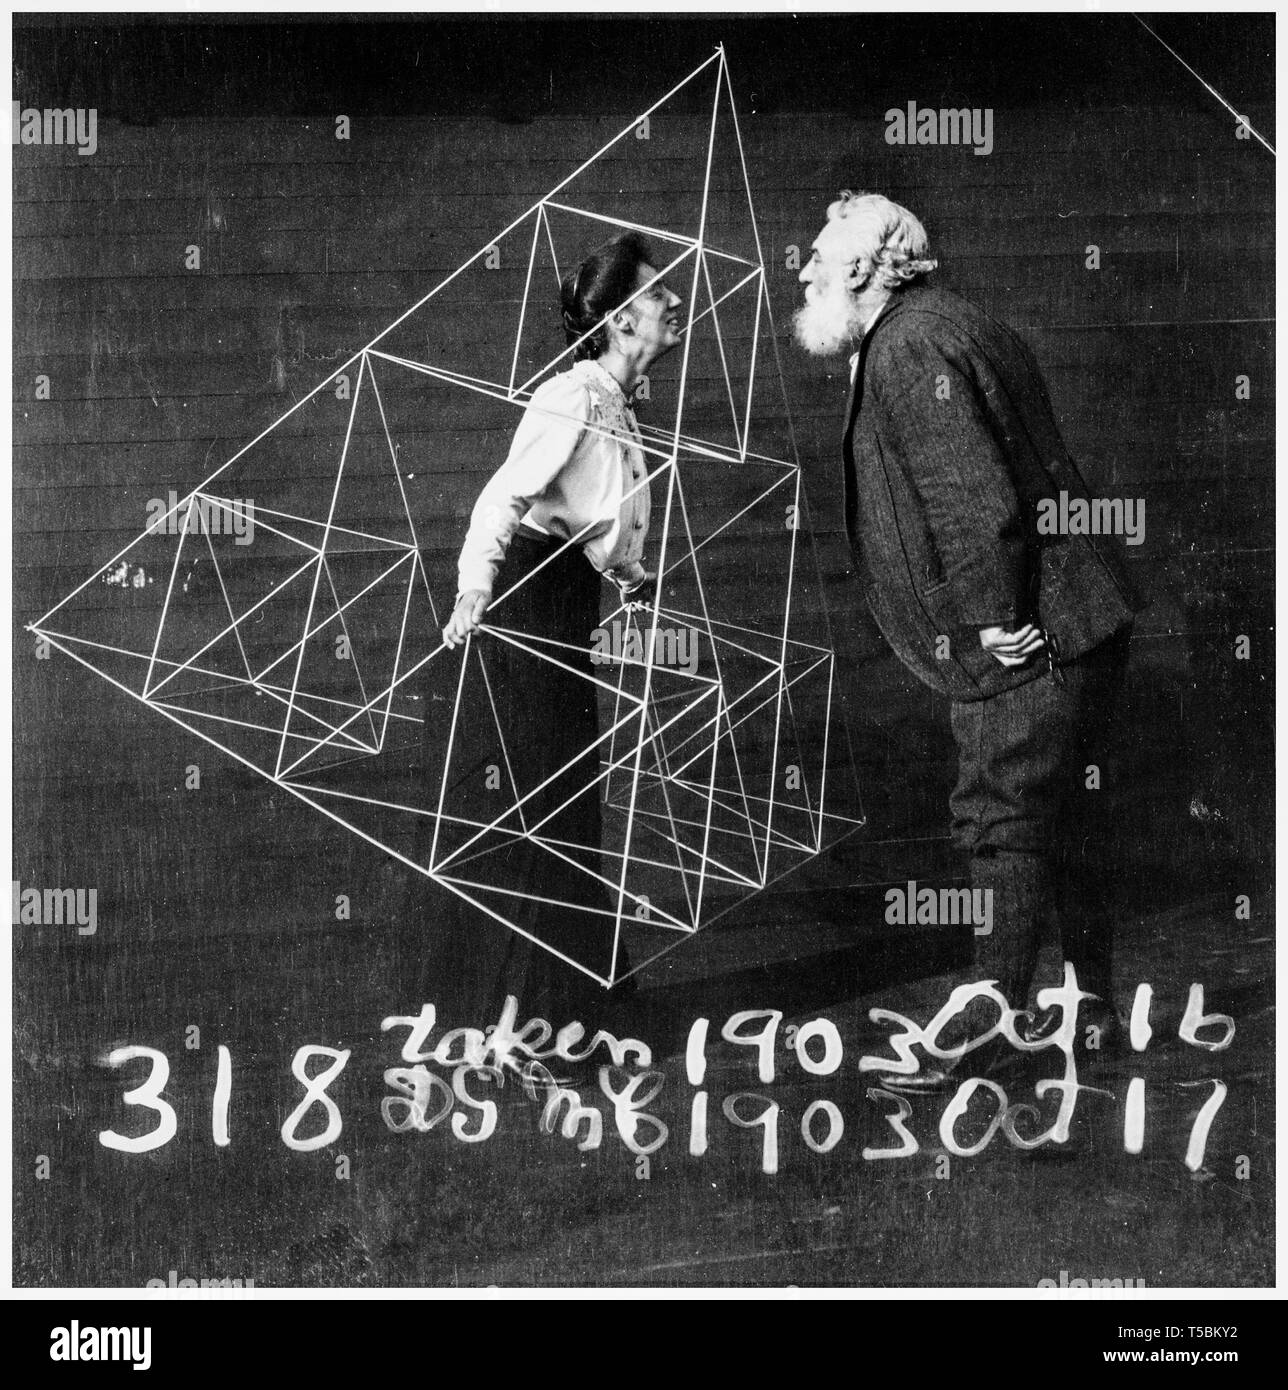 Alexander Graham Bell (1847-1922) facing his wife, Mabel Hubbard Gardiner  Bell, who is standing in a tetrahedral kite, 1902 Stock Photo - Alamy